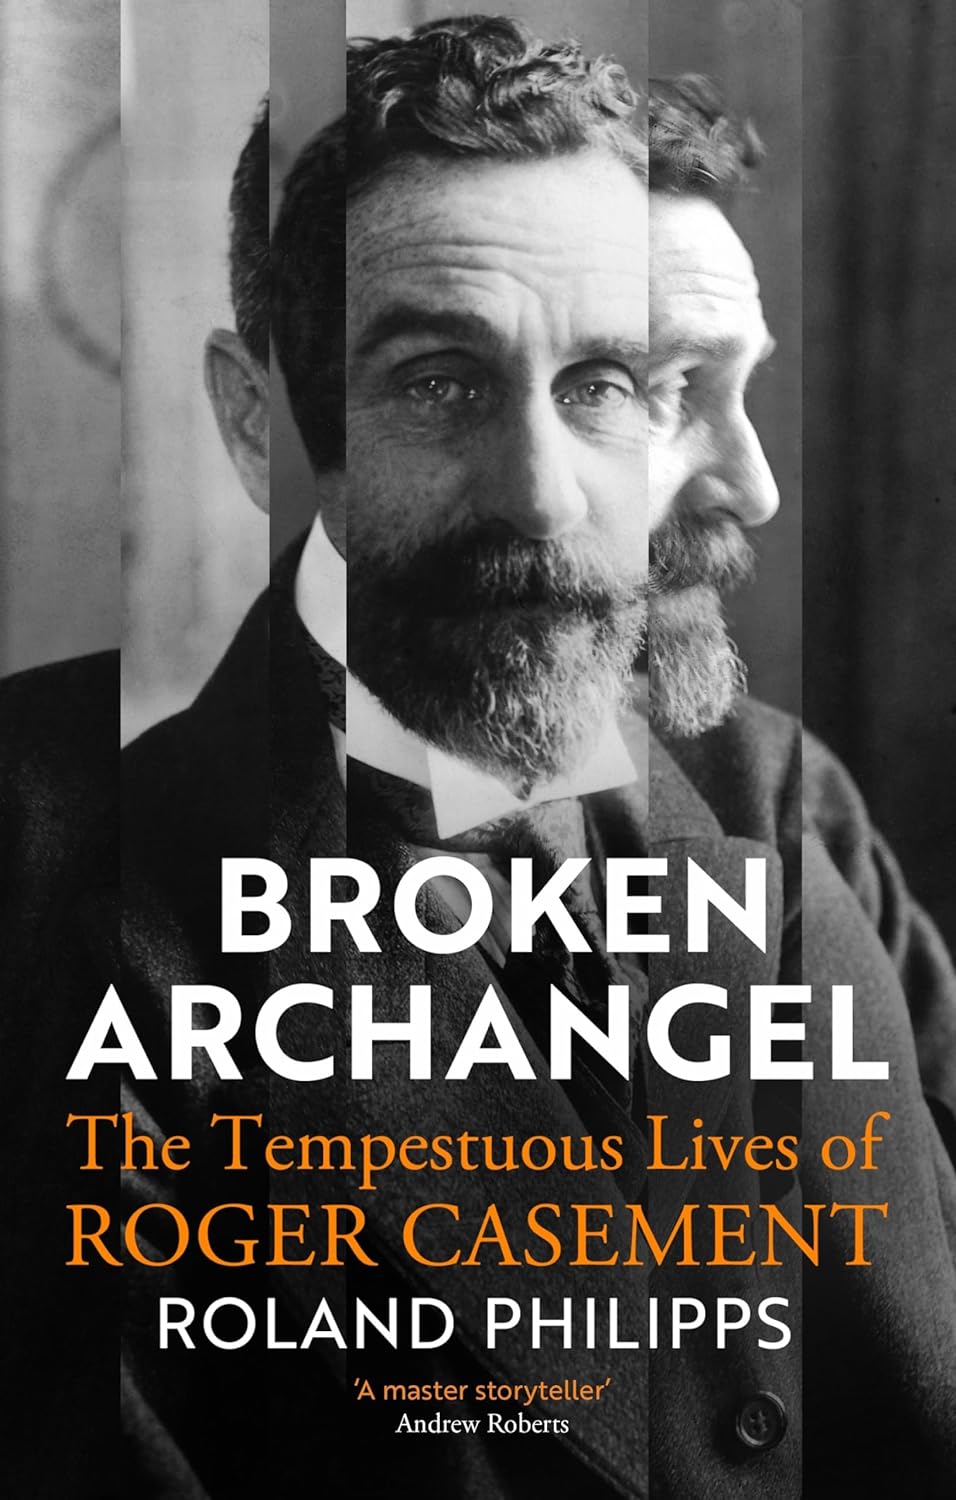 Review: The tragic life of Roger Casement